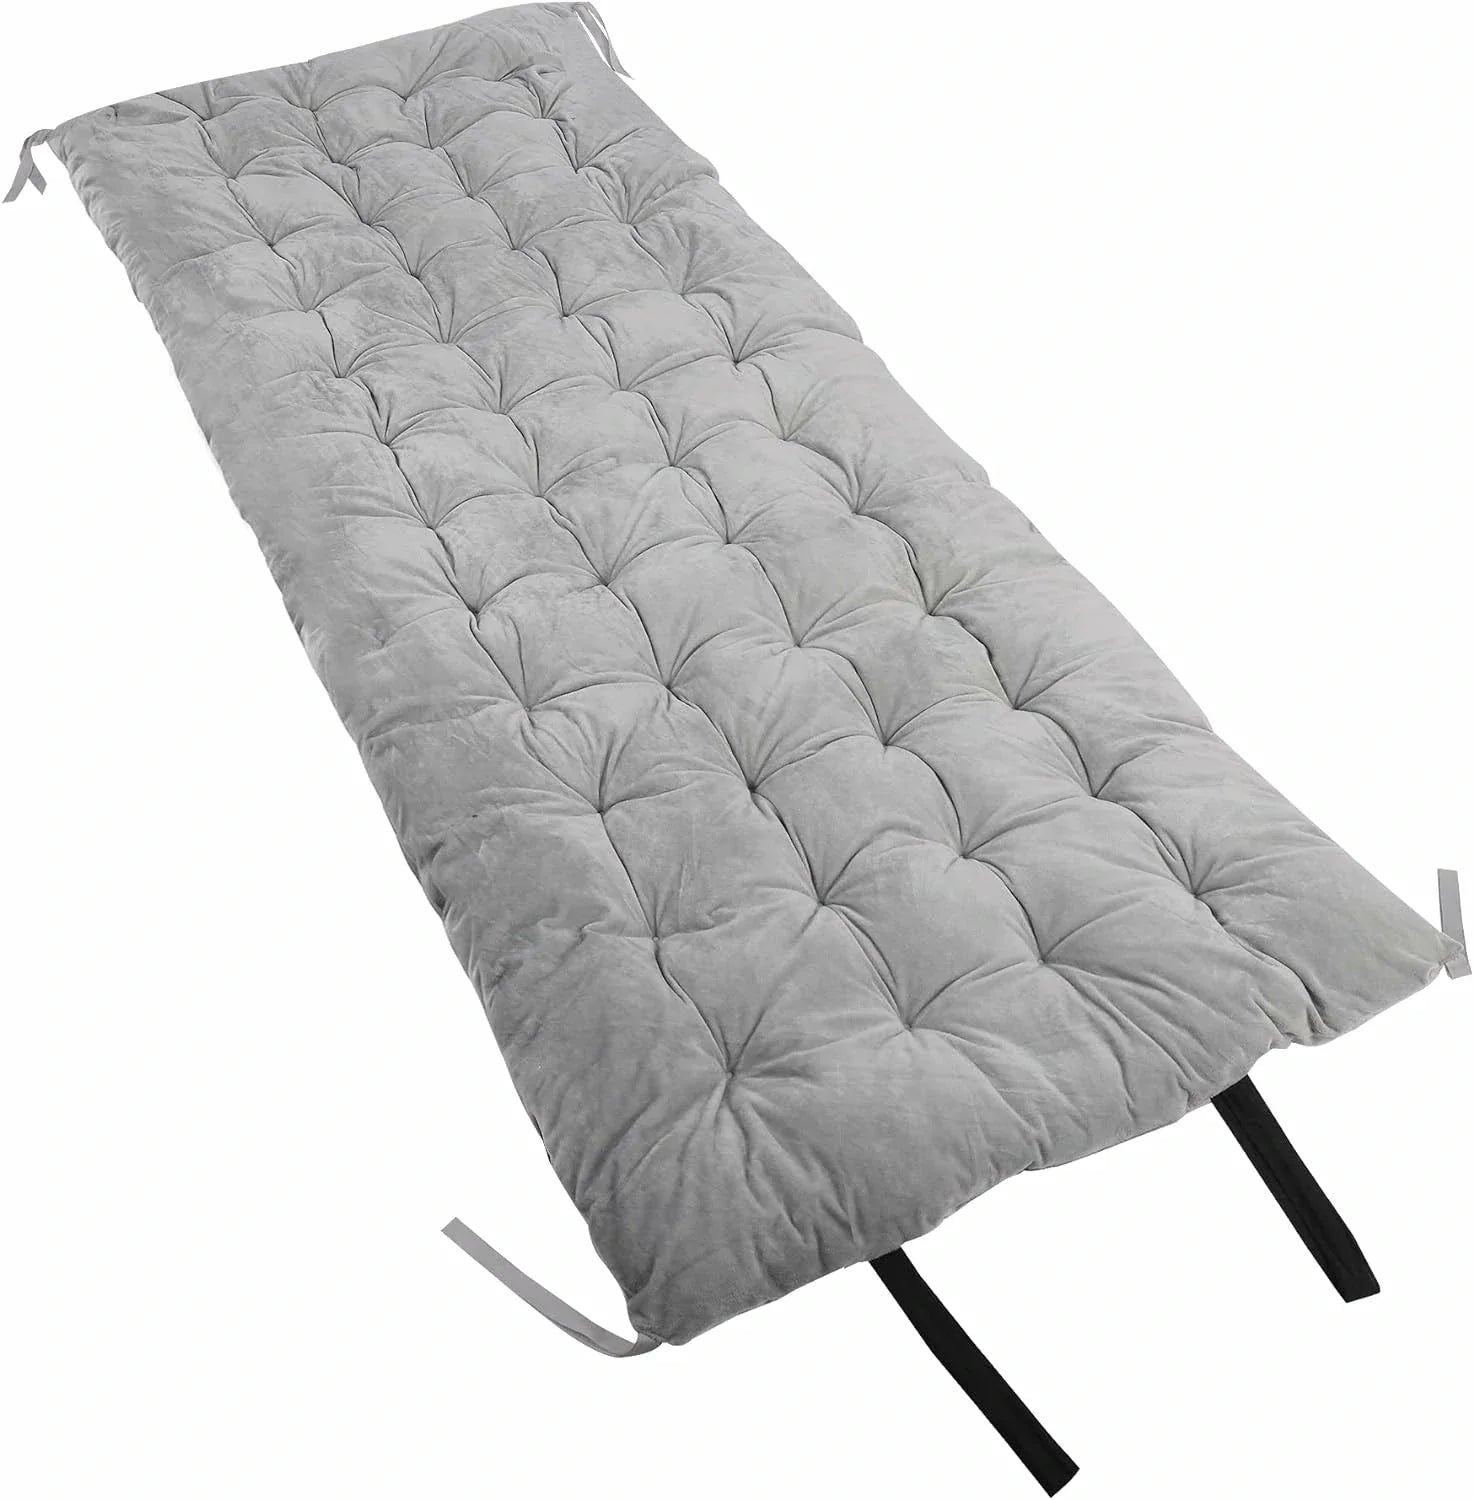 REDCAMP XL Mattress for Camping Bed